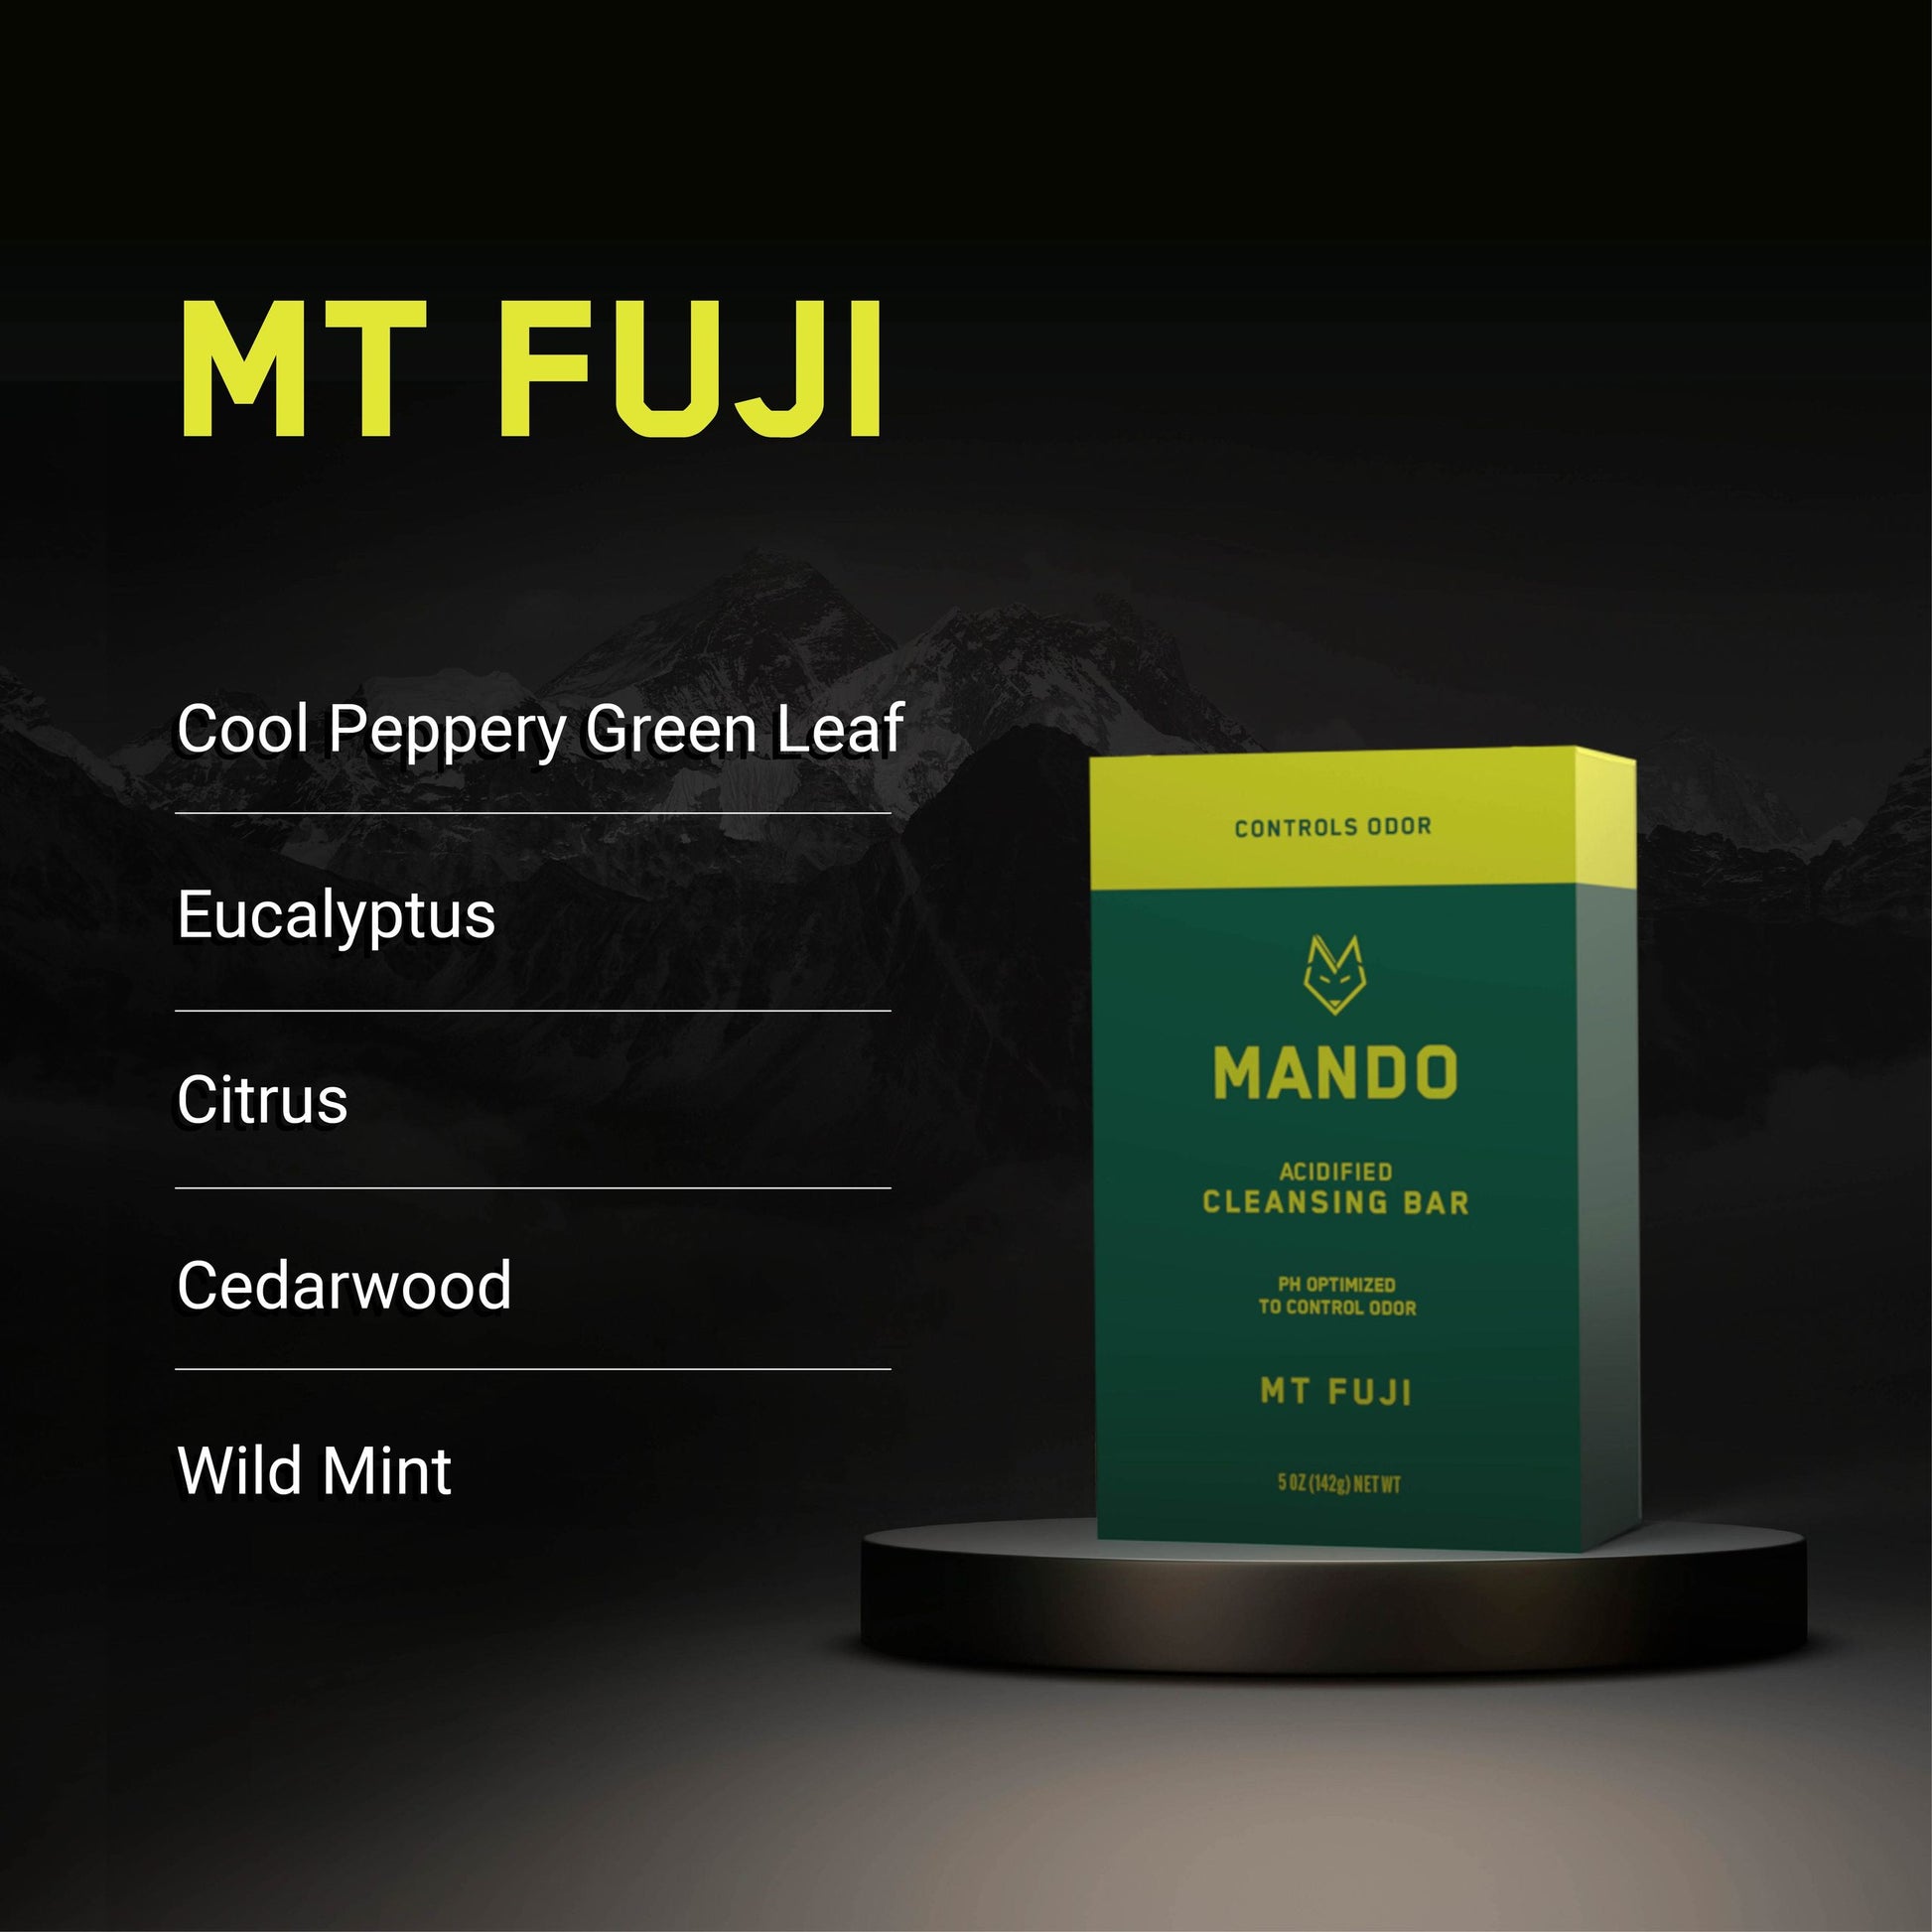 yellow green Bar of Mando 4-in-1 acidified cleansing bar in Mt Fuji scent with text: cool peppery green leaf, eucalyptus, citrus, cedarwood, wild mint